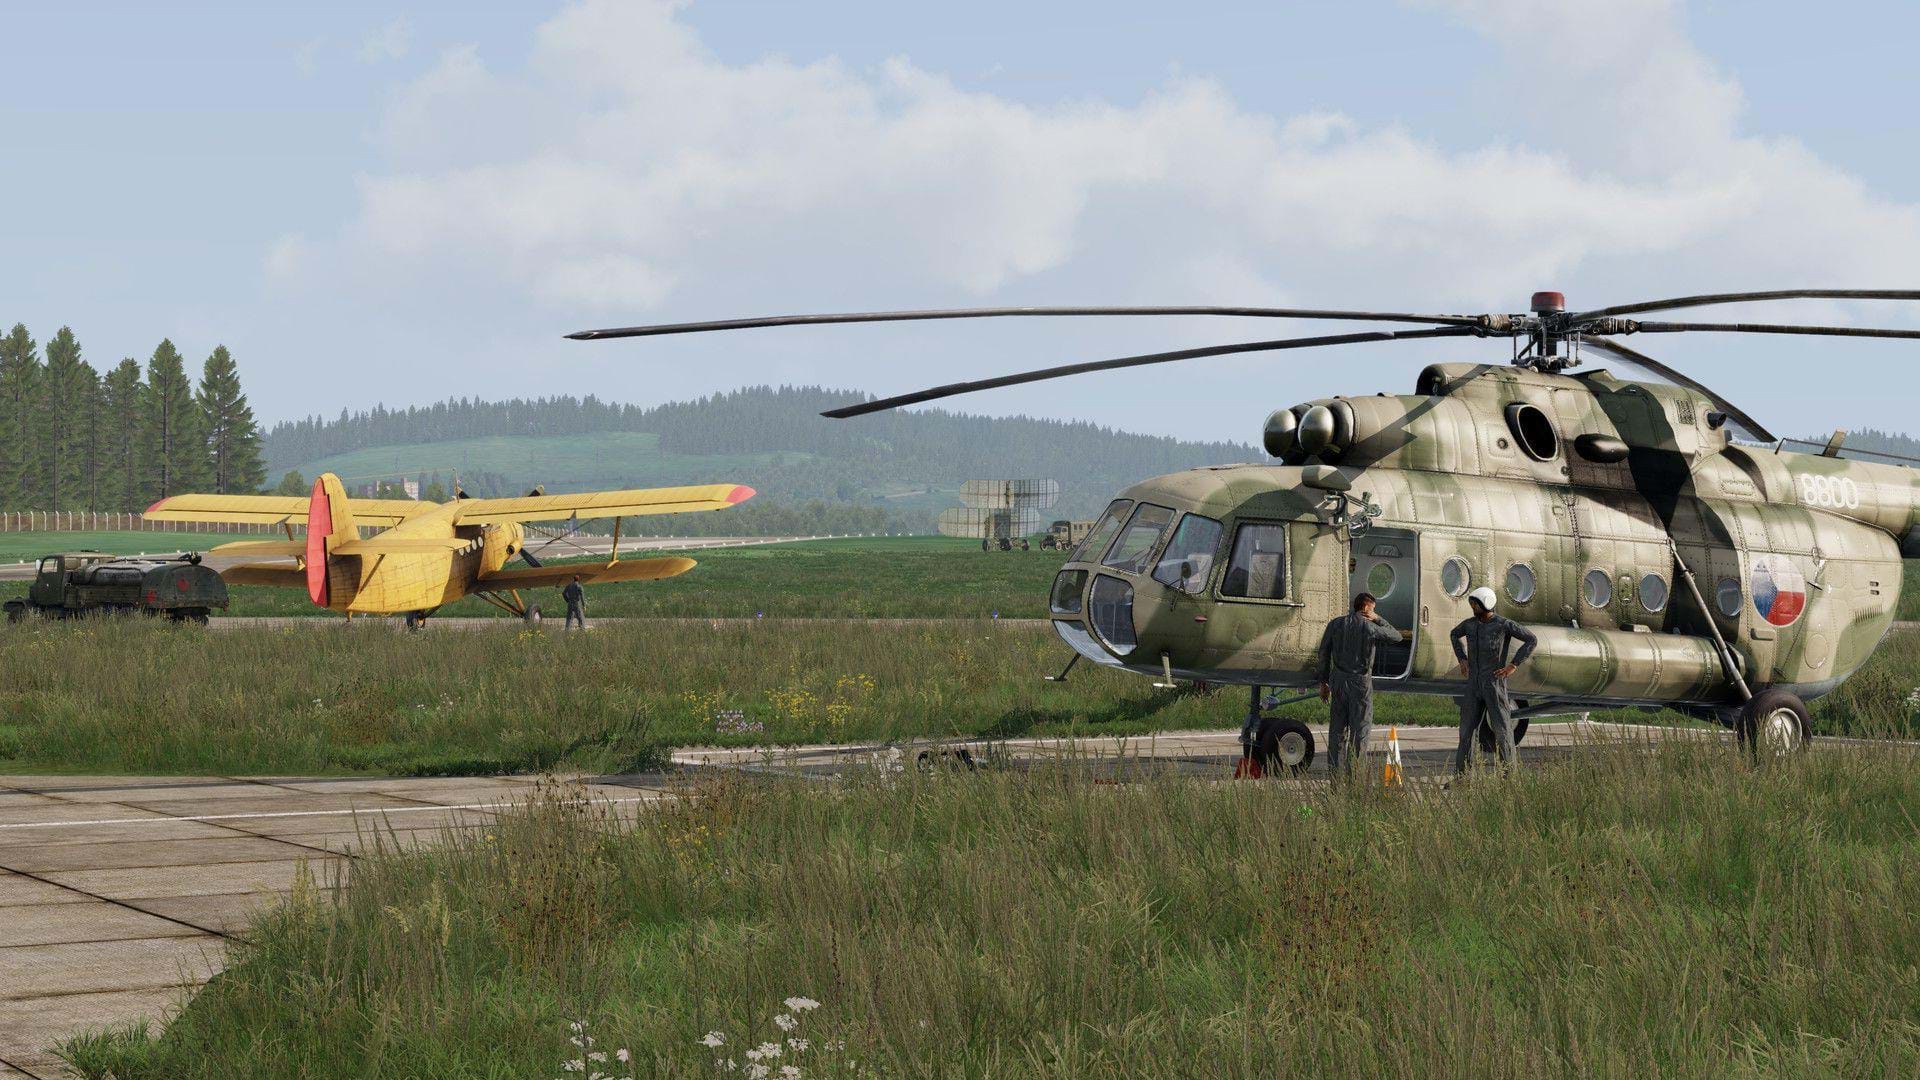 ARMA III new Creator DLC to feature the UH-60 and Mi-17